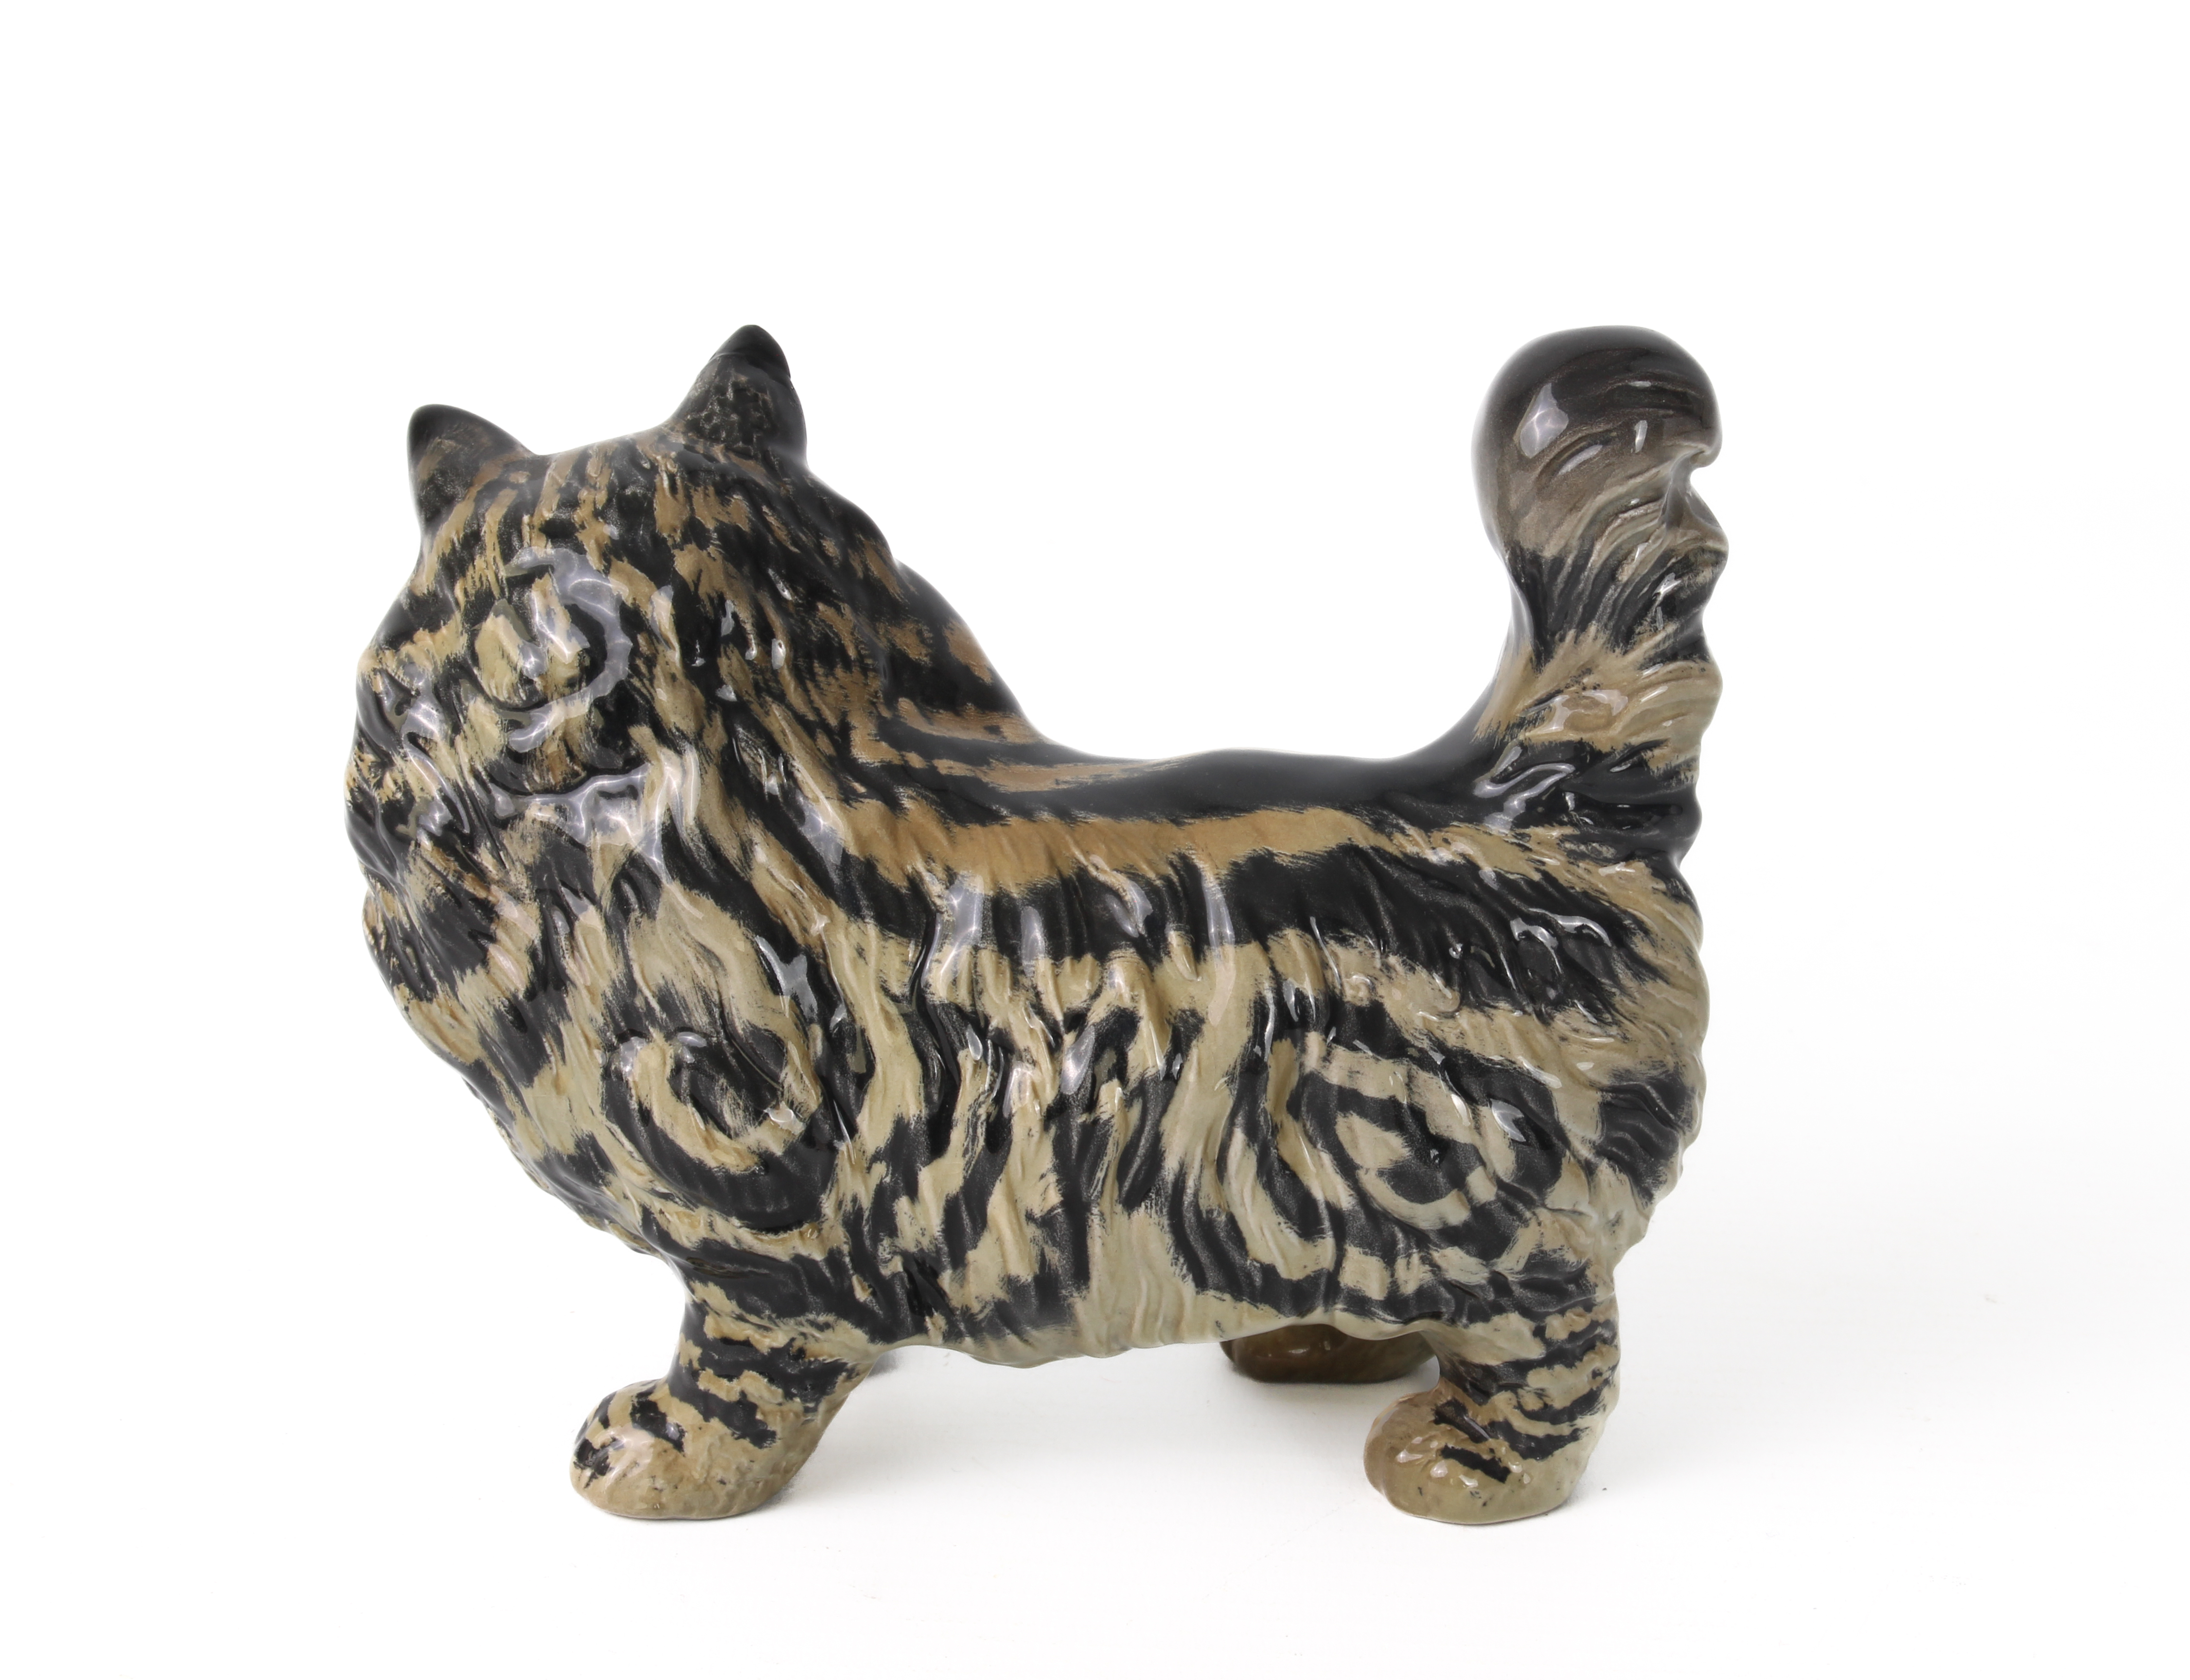 A Beswick Persian Cat 1898 figure, in grey Swiss roll colourway - designed by Albert Hallam, printed - Image 2 of 3